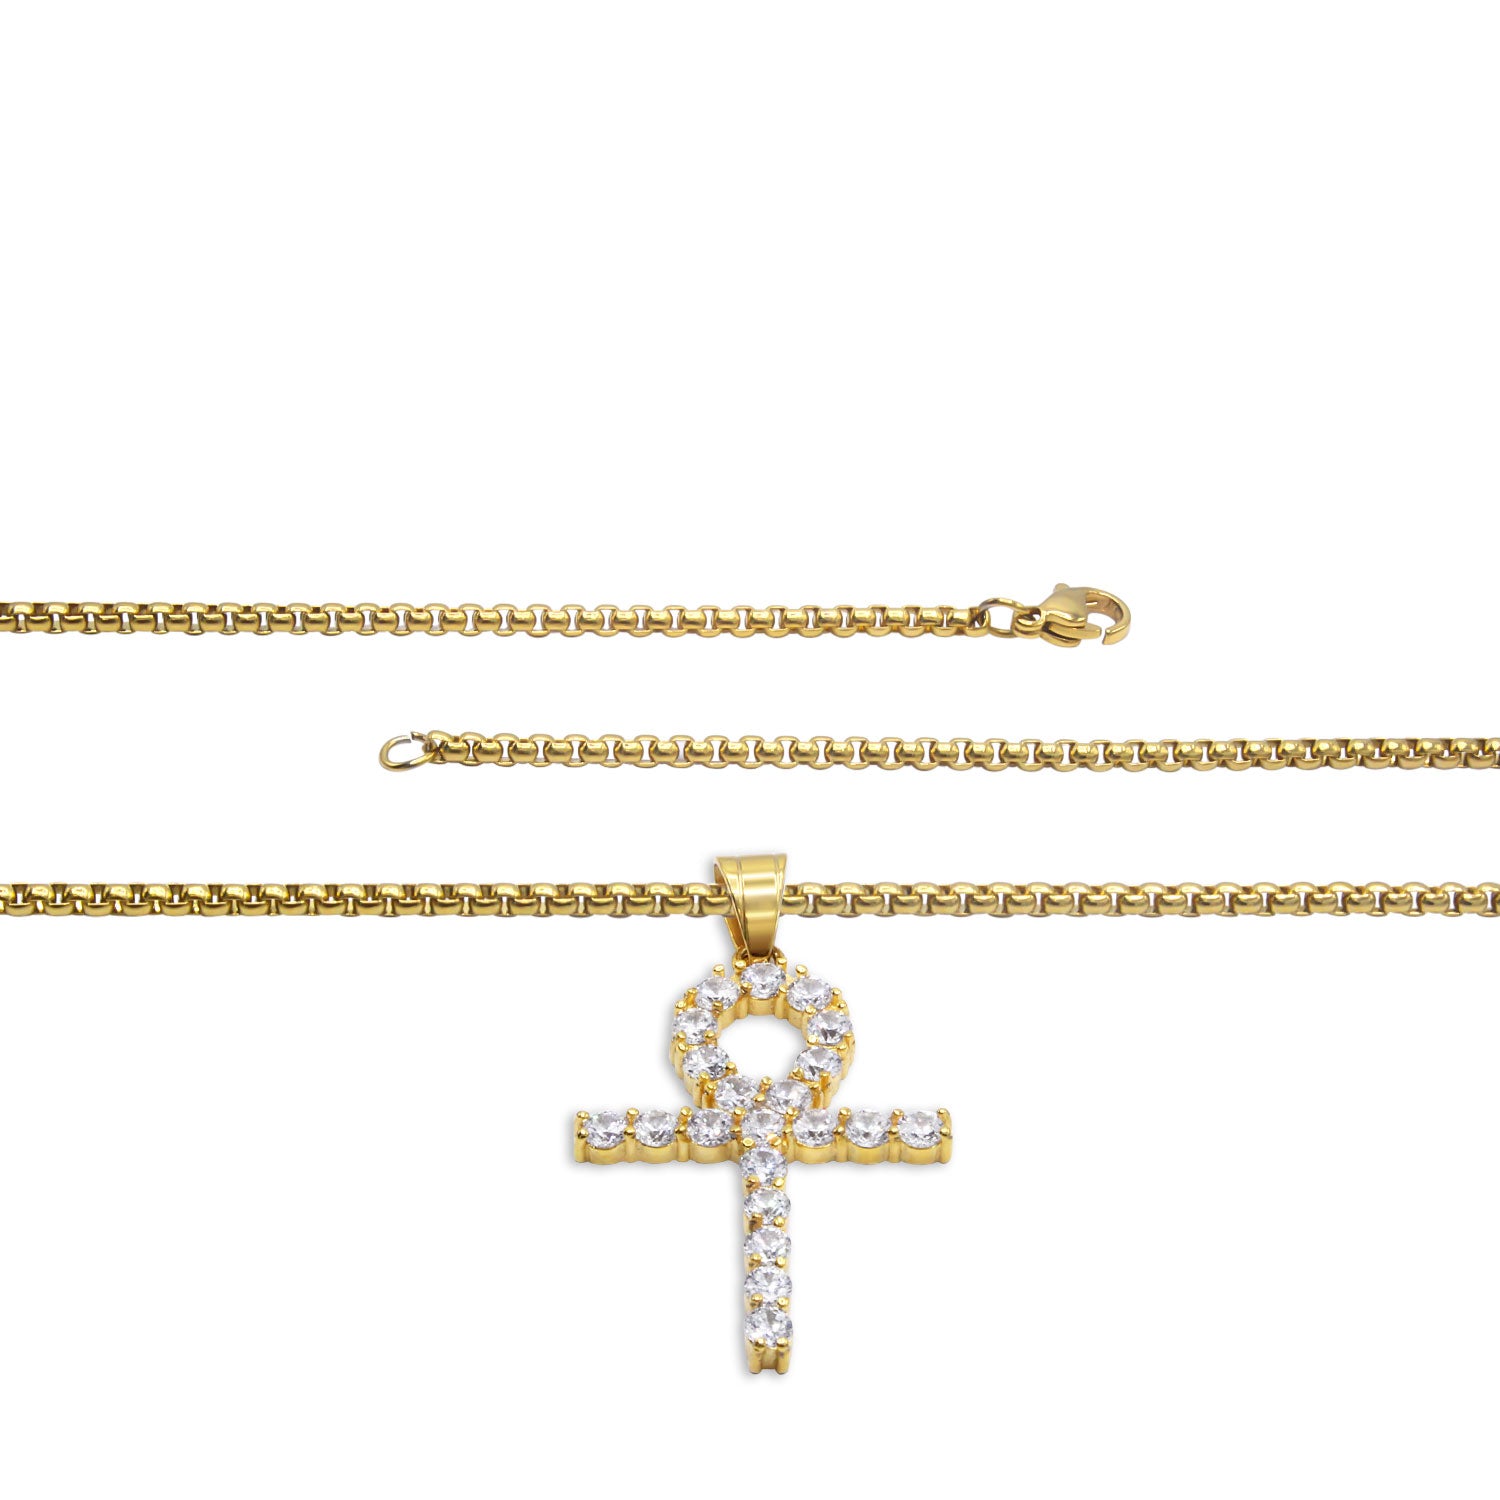 Ankh 1 Pendant Cubic Zirconia with Necklace Set 14K Gold Plated